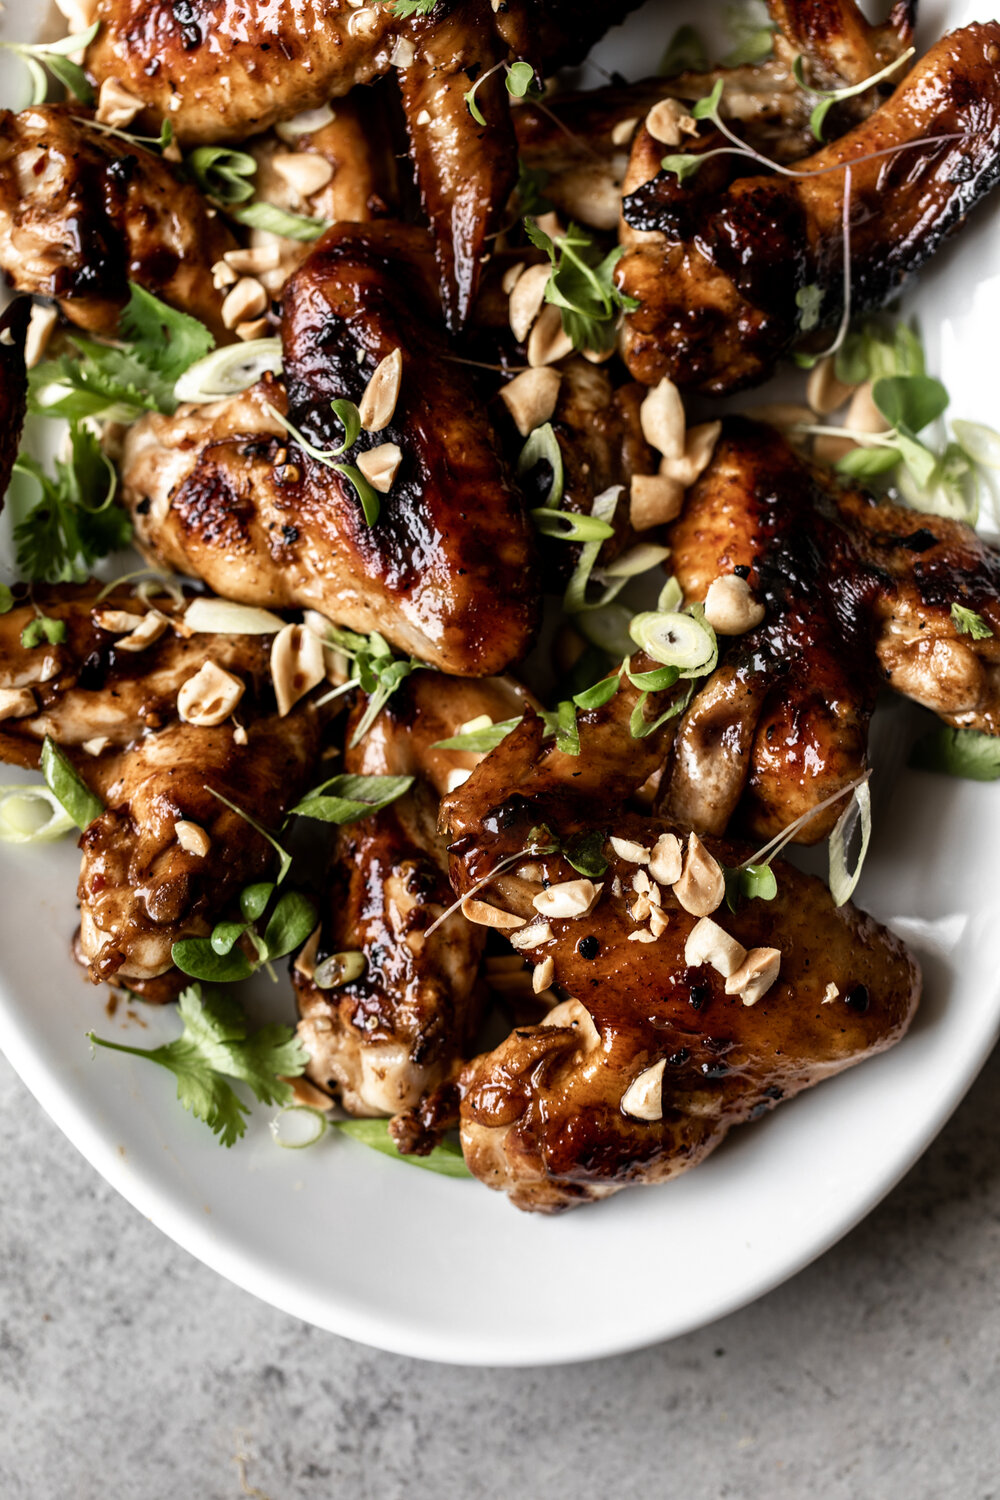 Grilled Garlic Soy Chicken Wings with Herbs & Peanuts-23.jpg